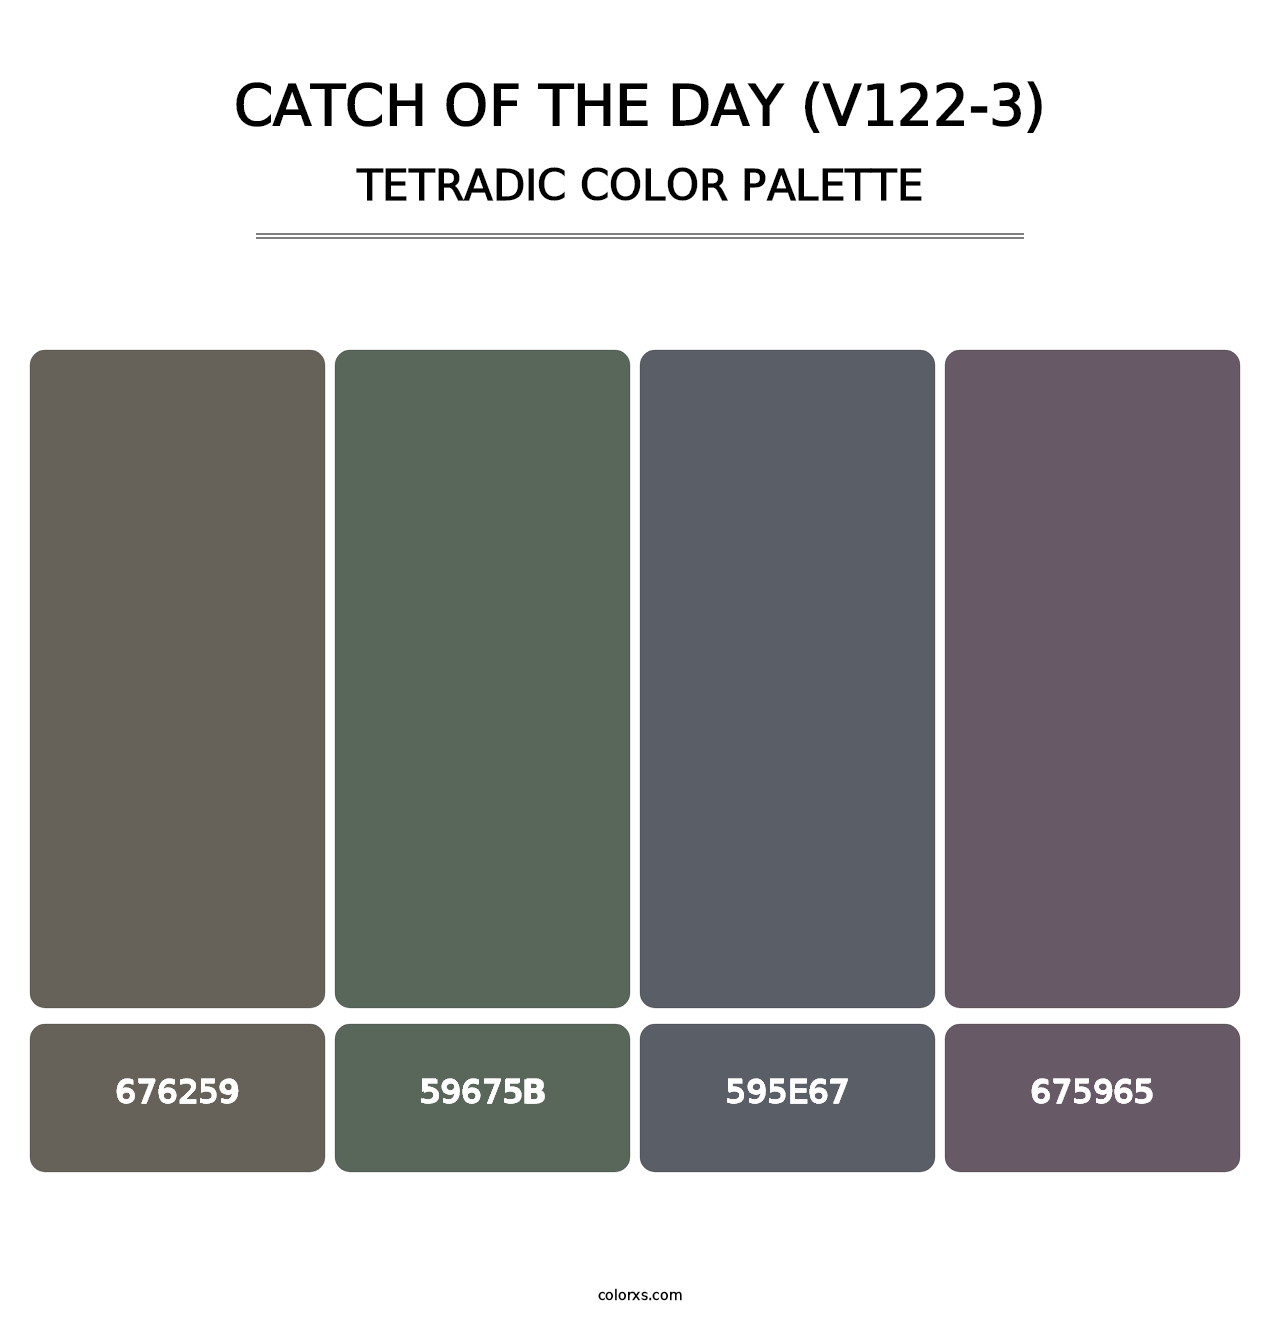 Catch of the Day (V122-3) - Tetradic Color Palette